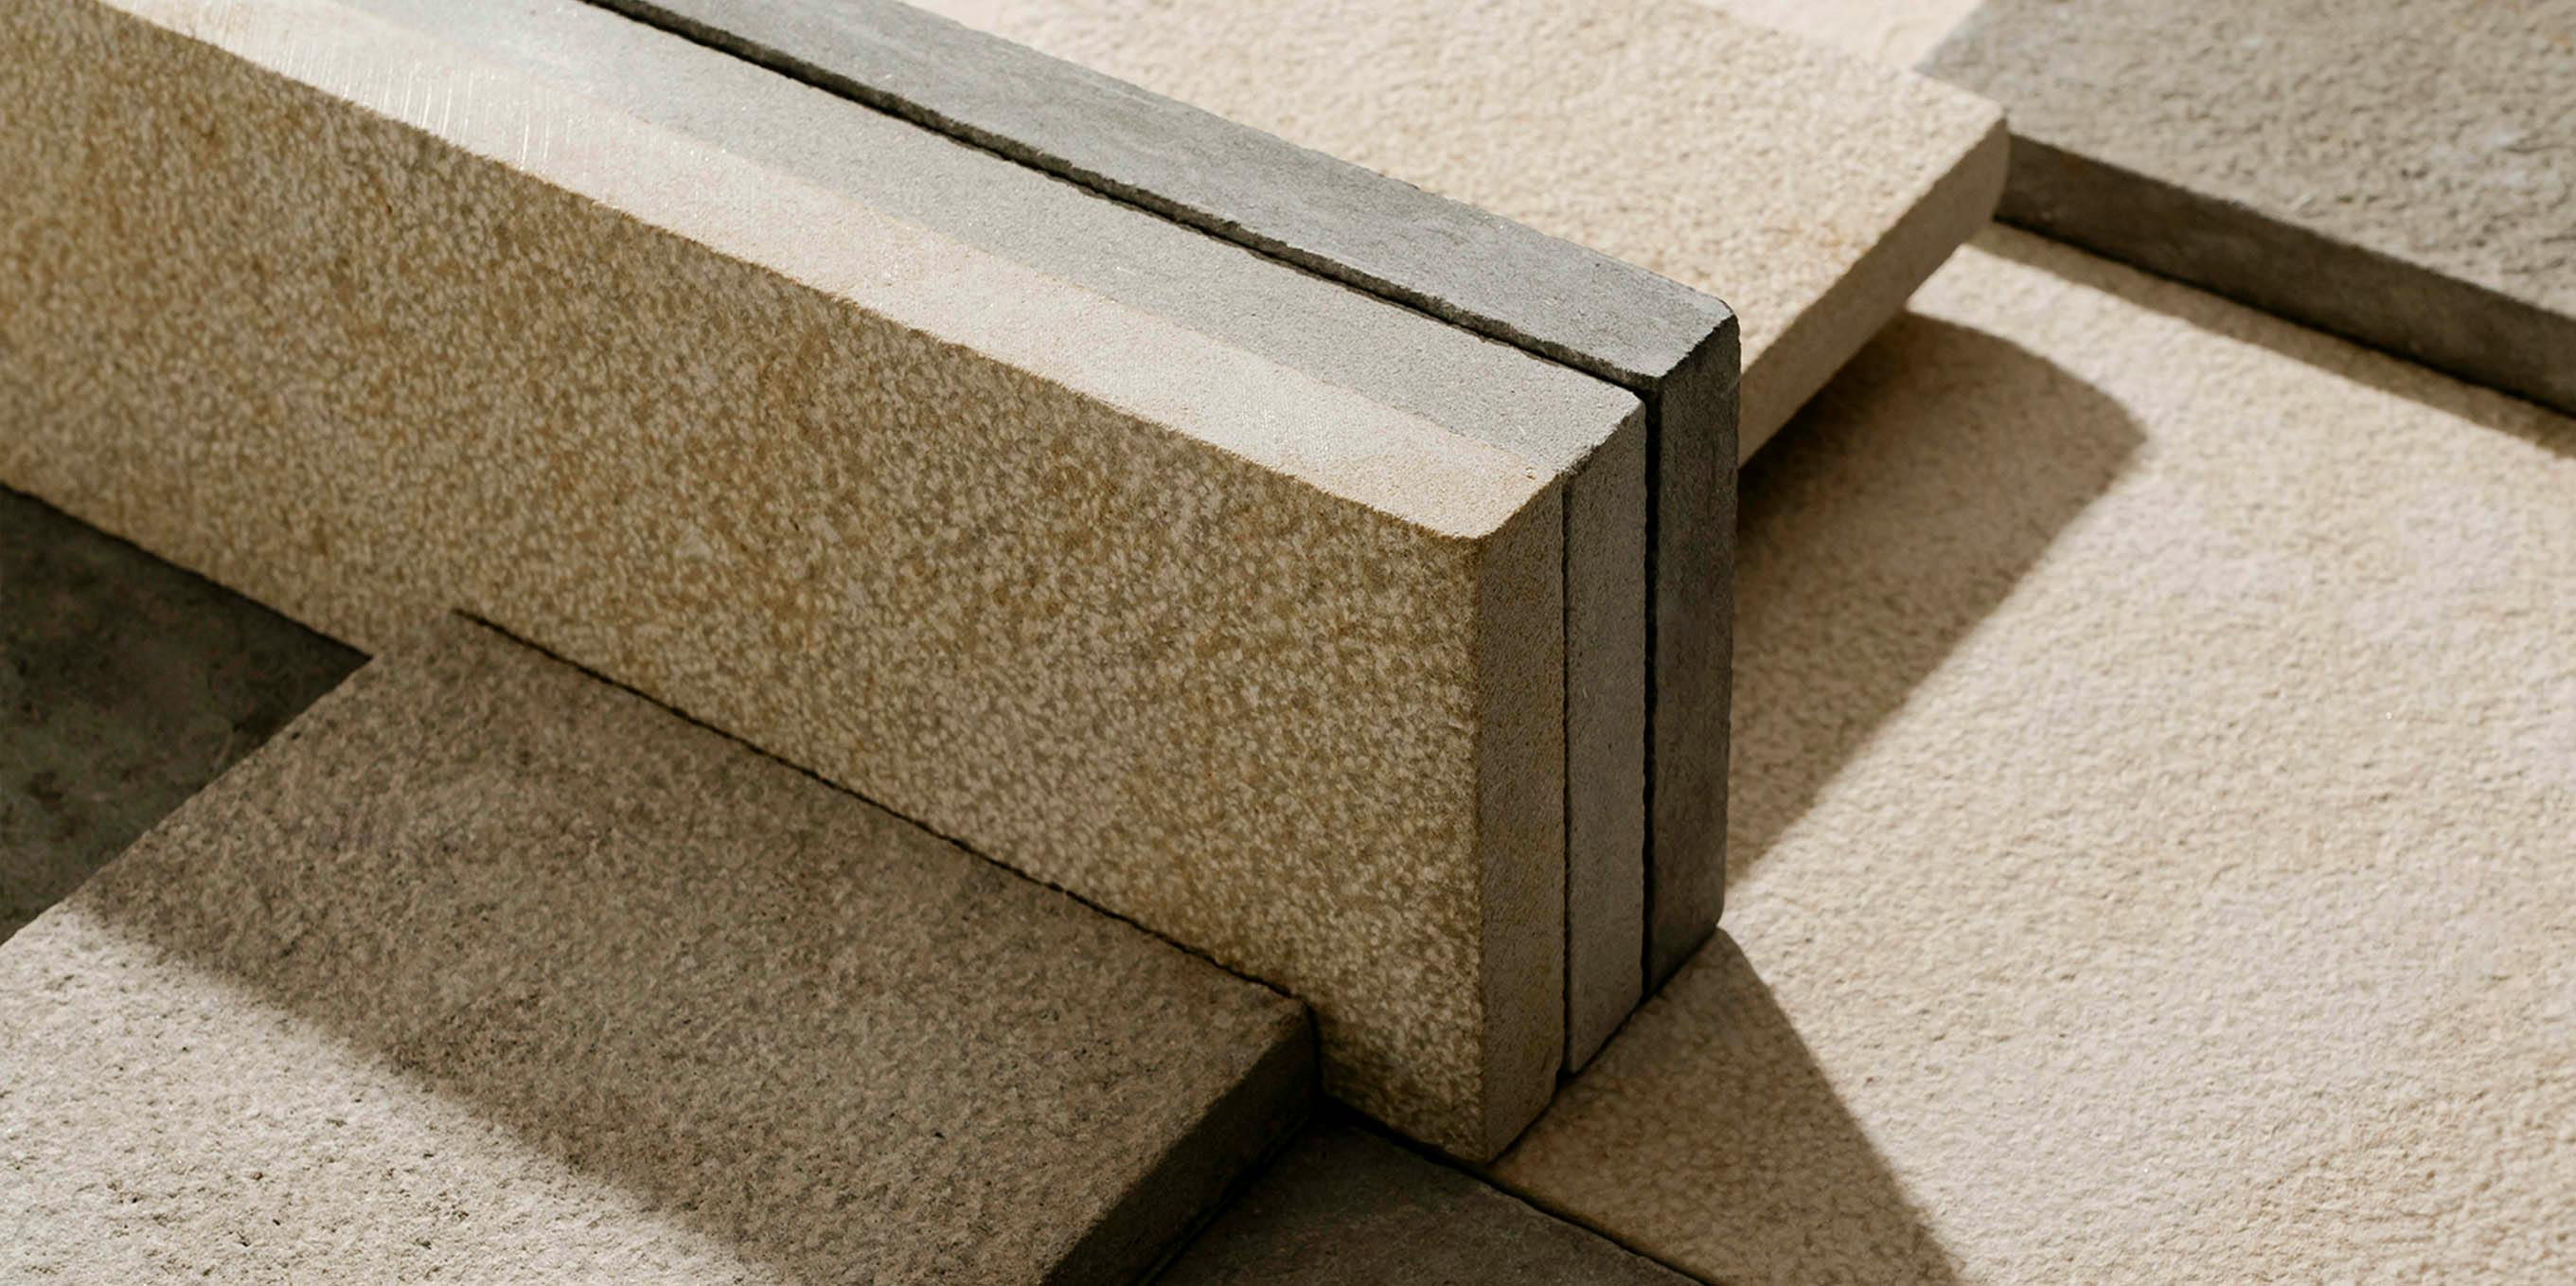 Limestone Tile collection featured image.